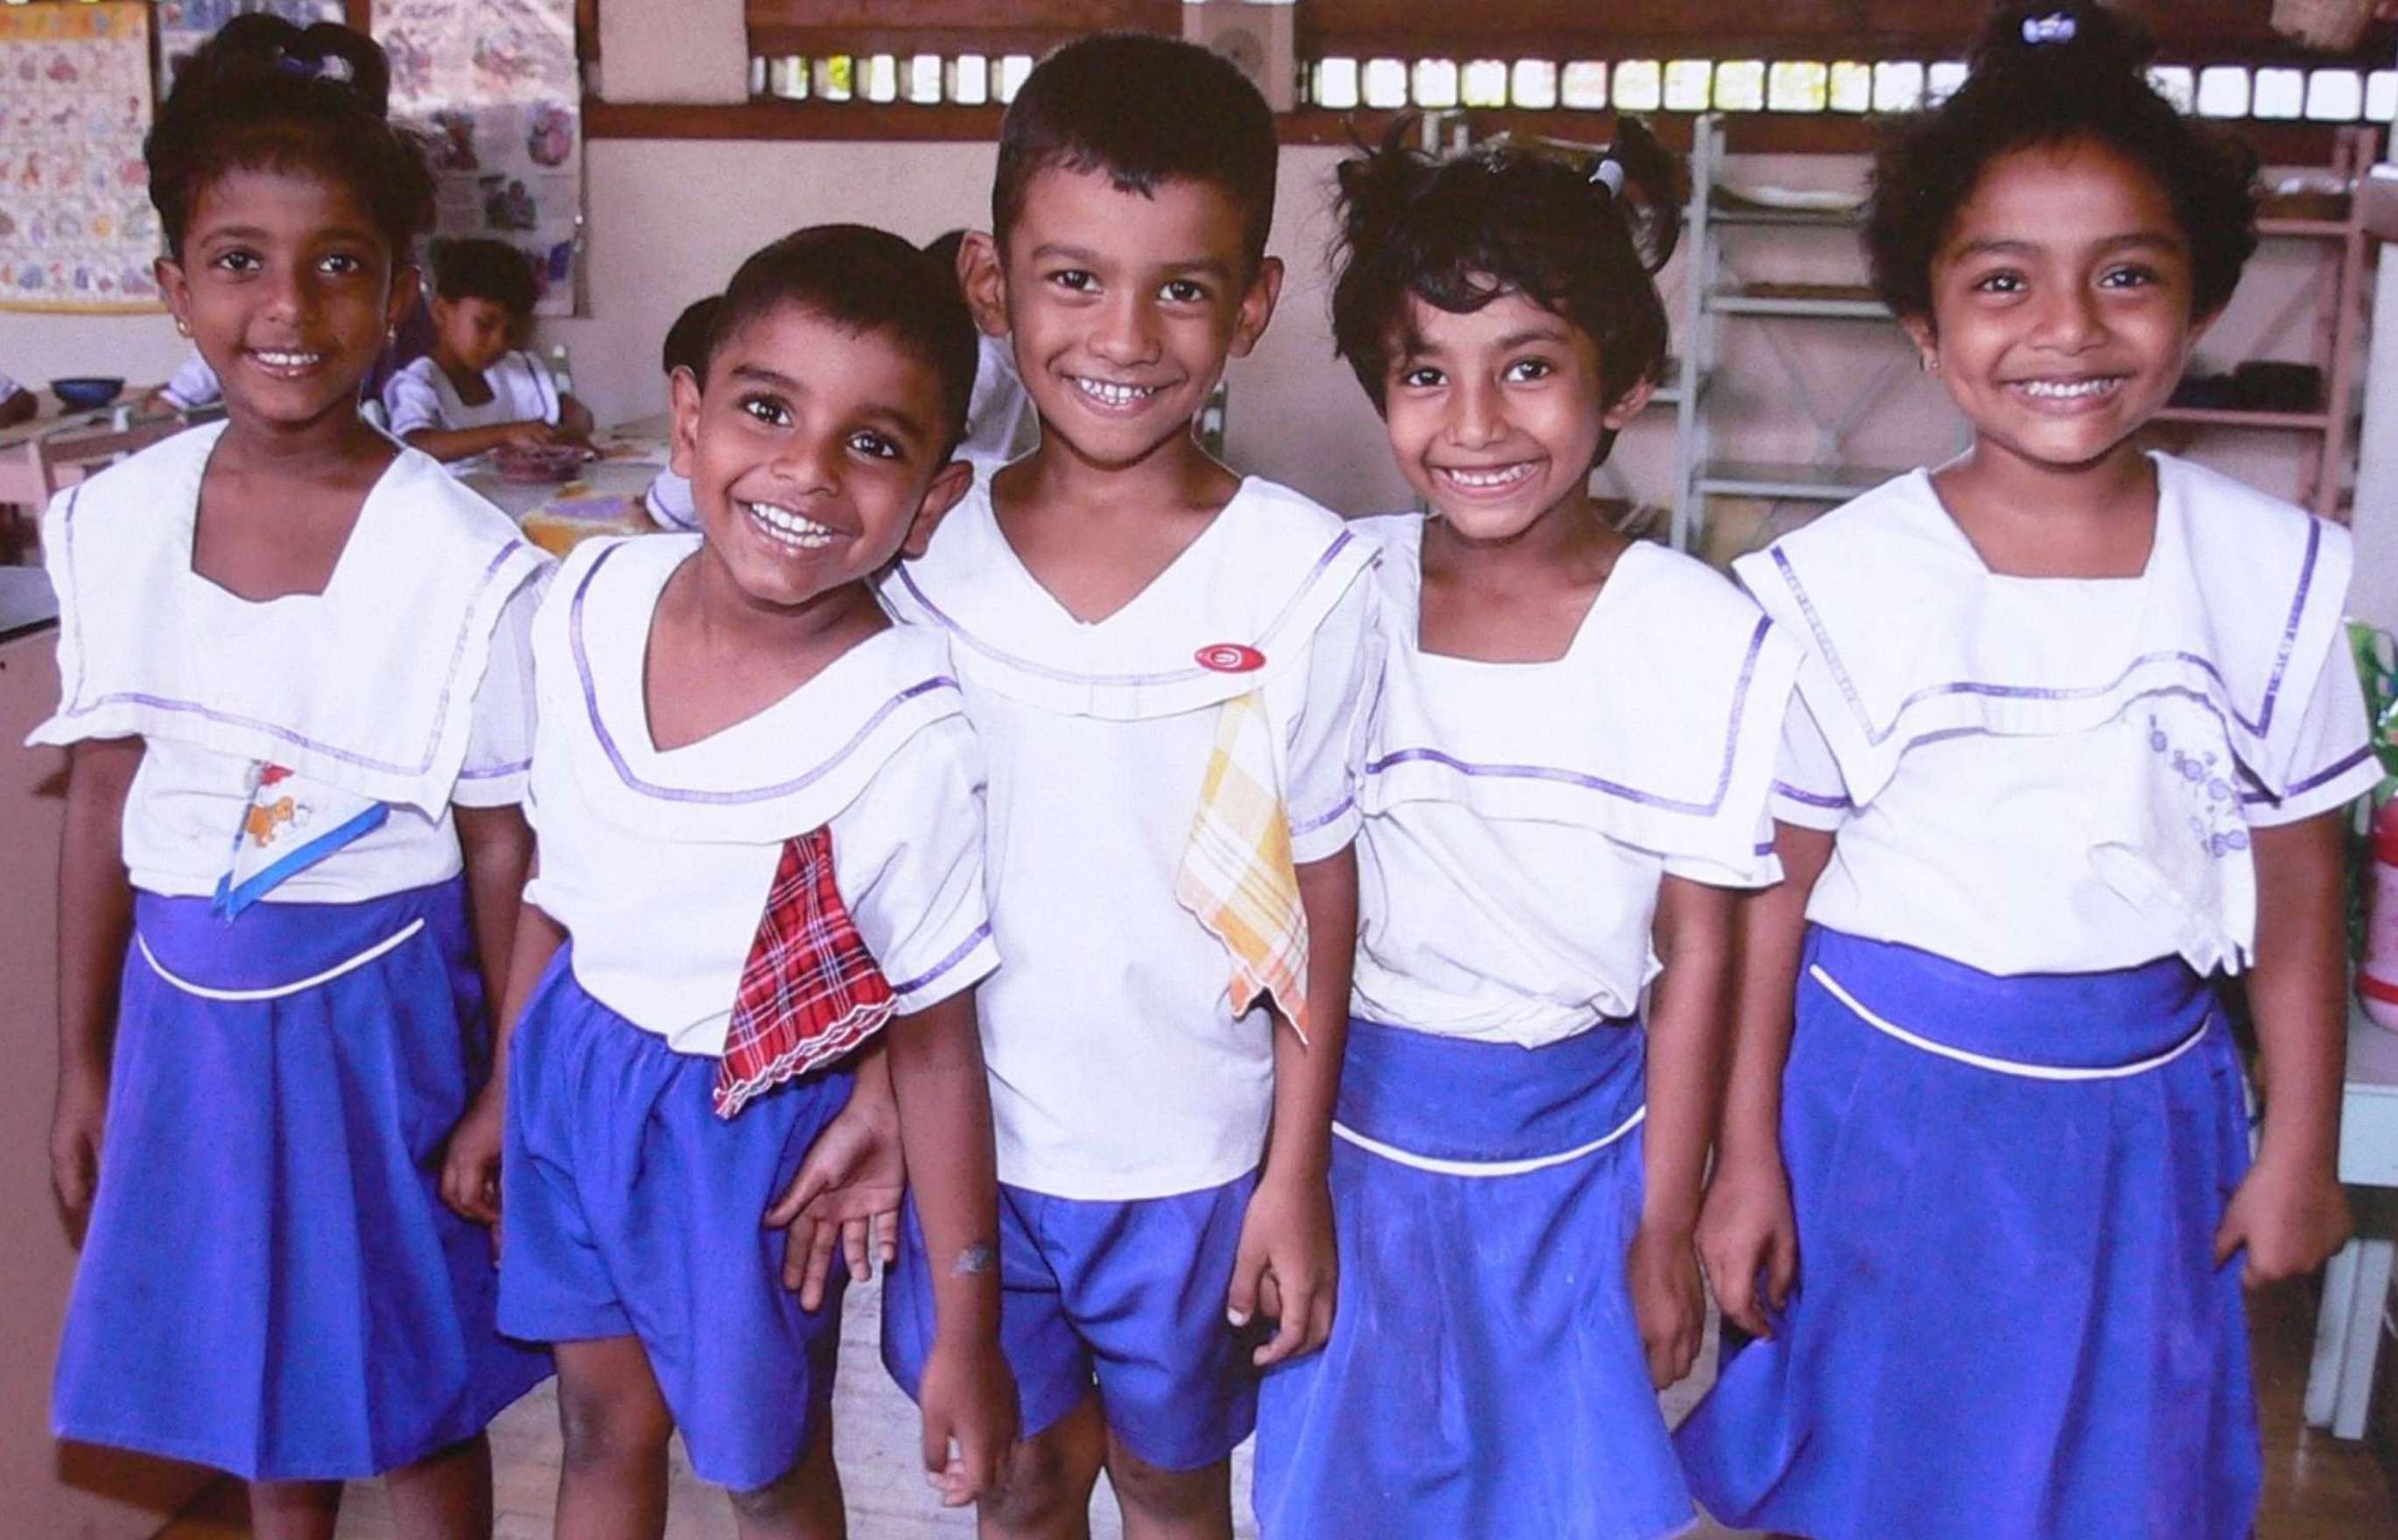 Five smiling school children in blue and white school uniforms pose side-by-side for a photograph.